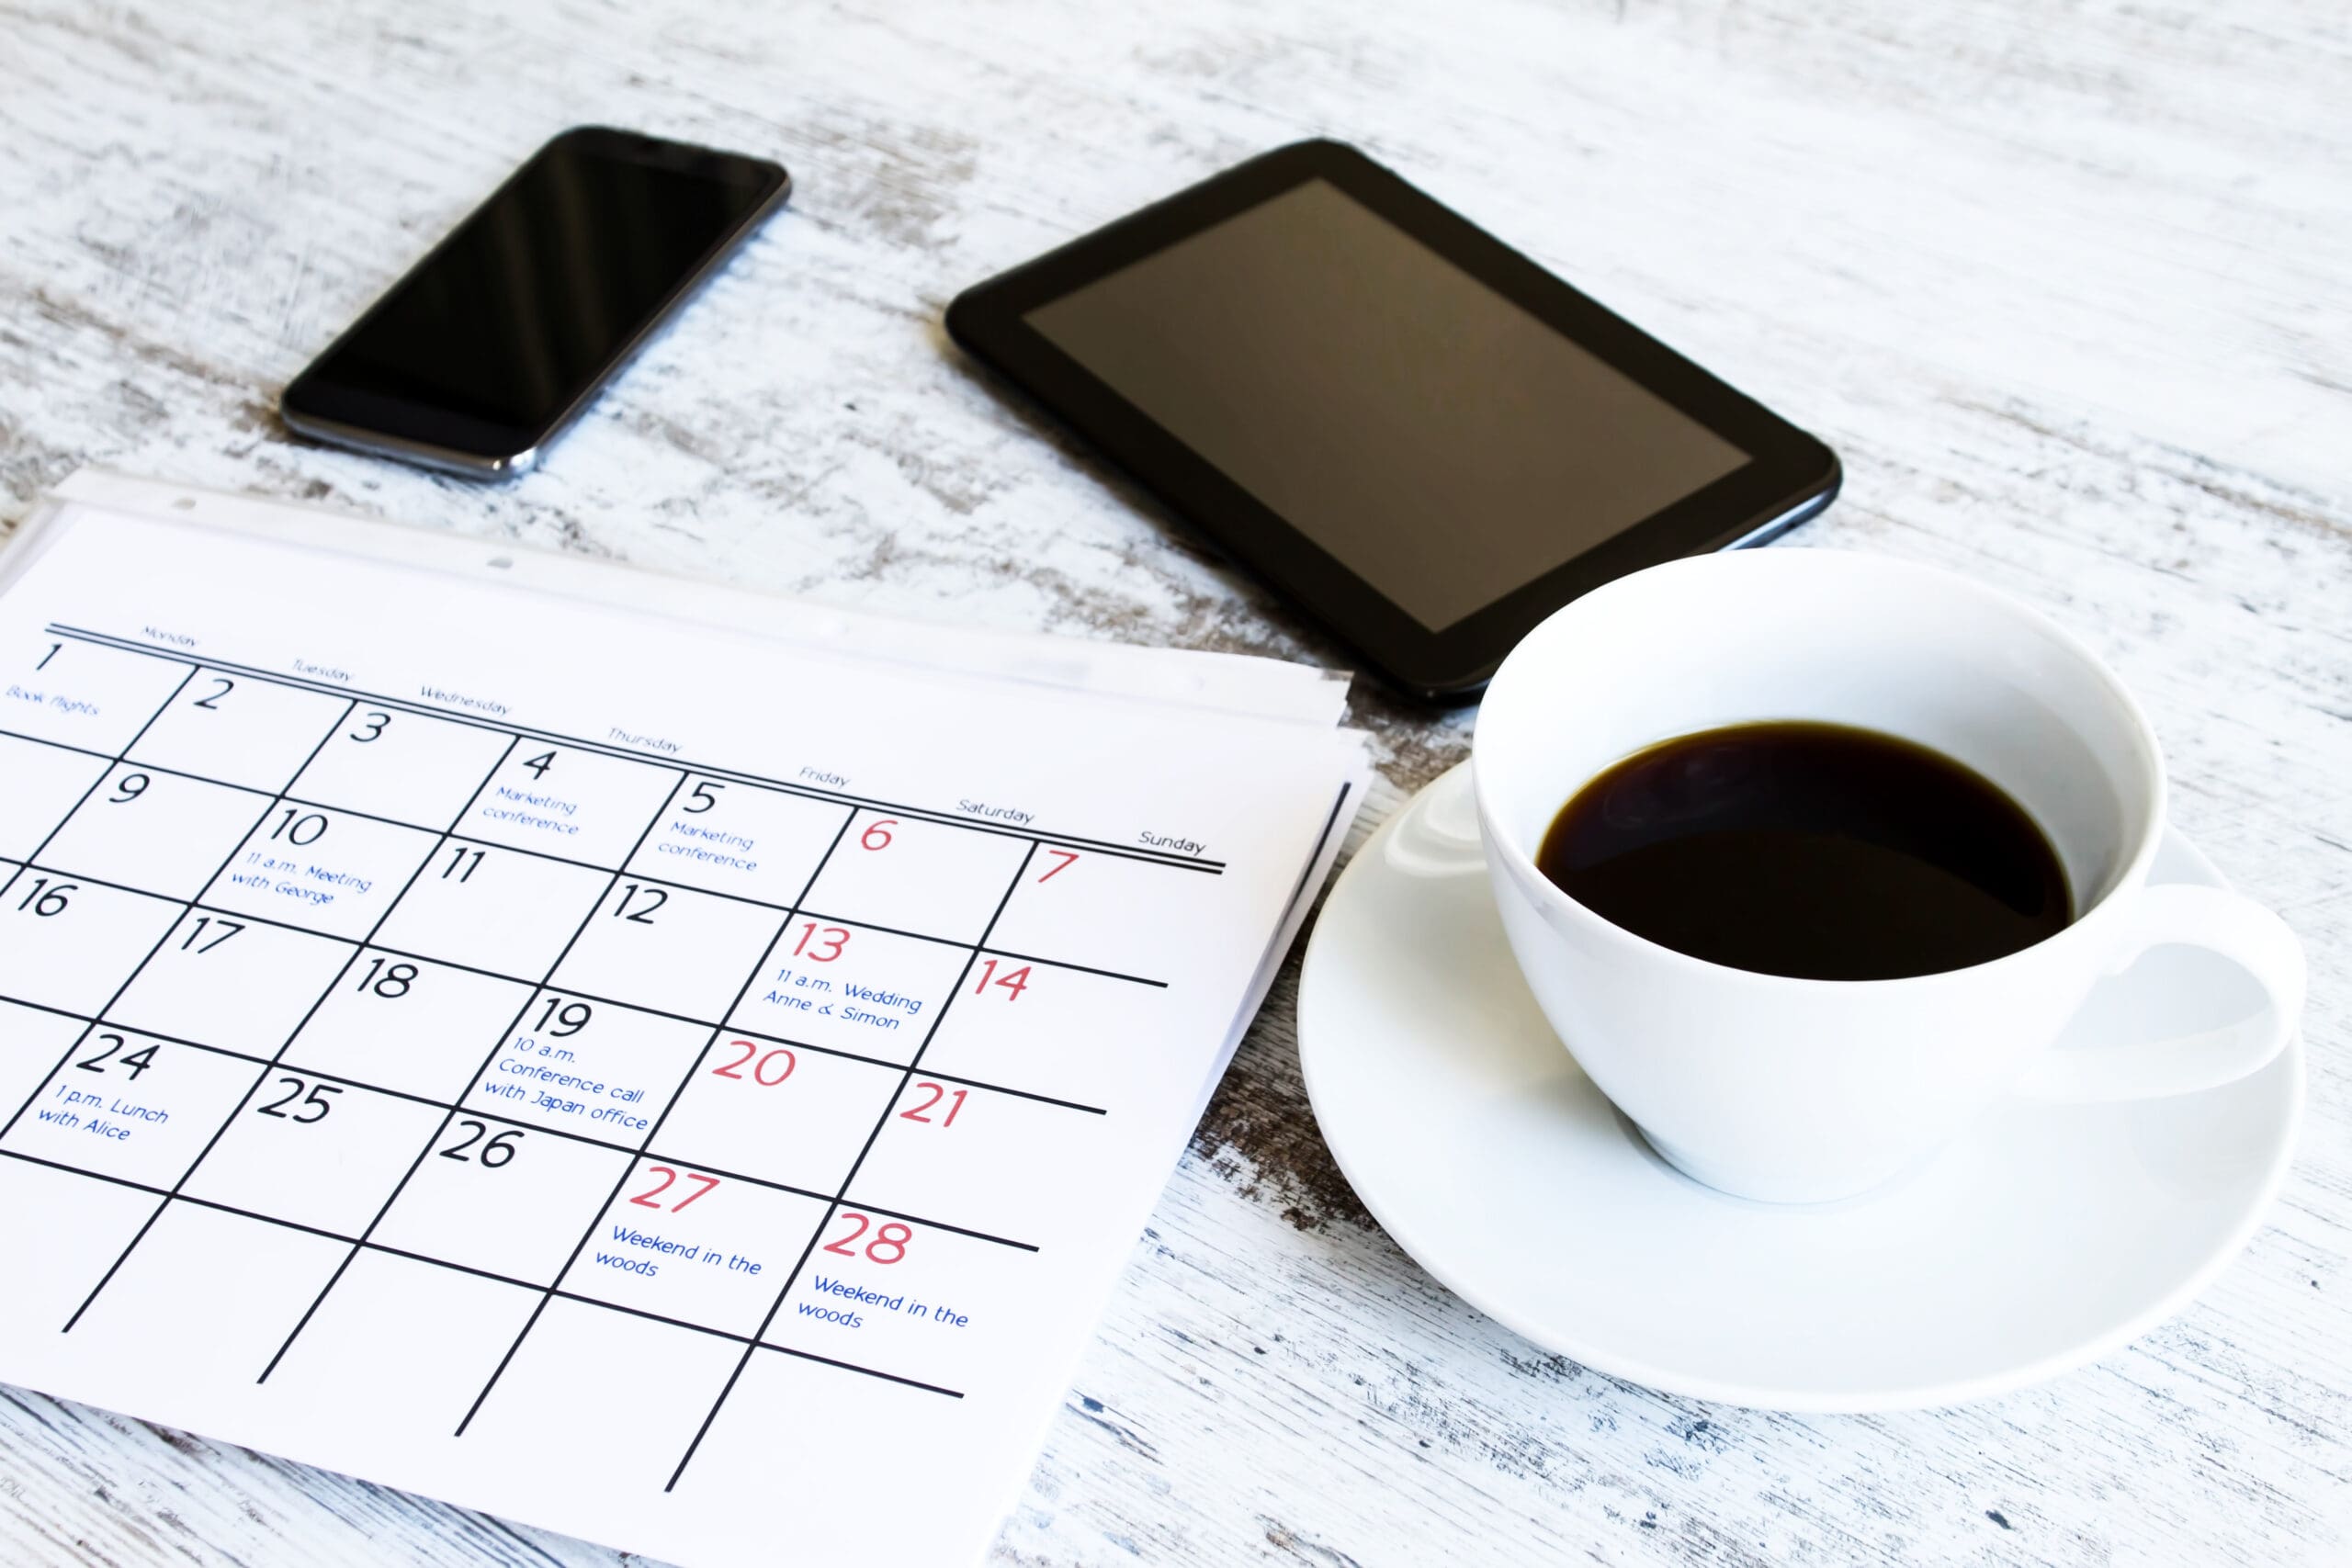 Schedule your workouts on your calendar to help you stay motivated to workout after work.